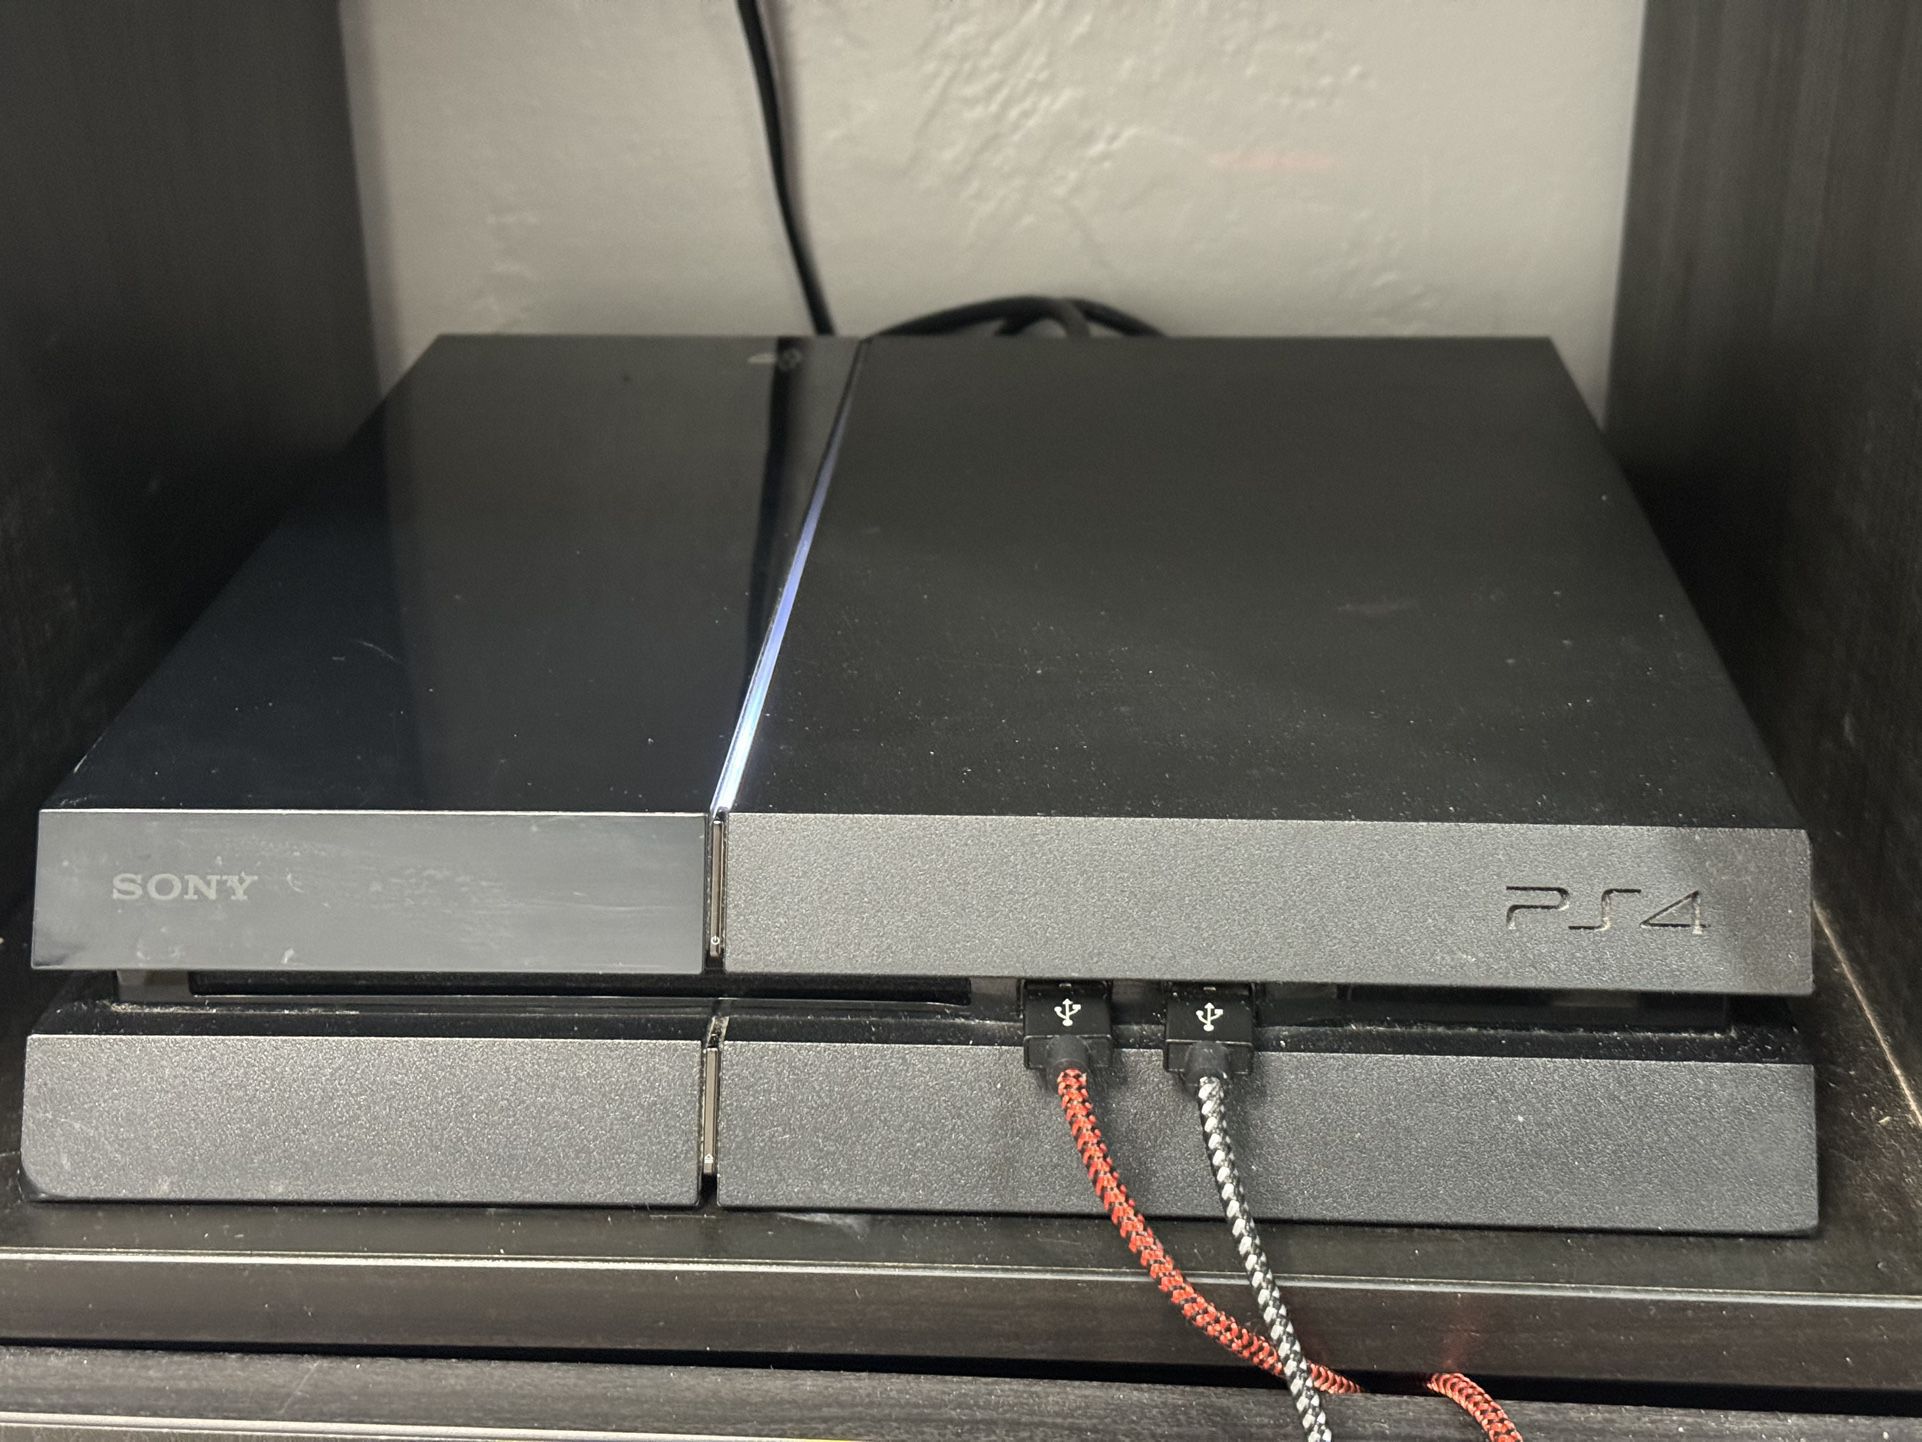 PlayStation 4 for sale (games included)